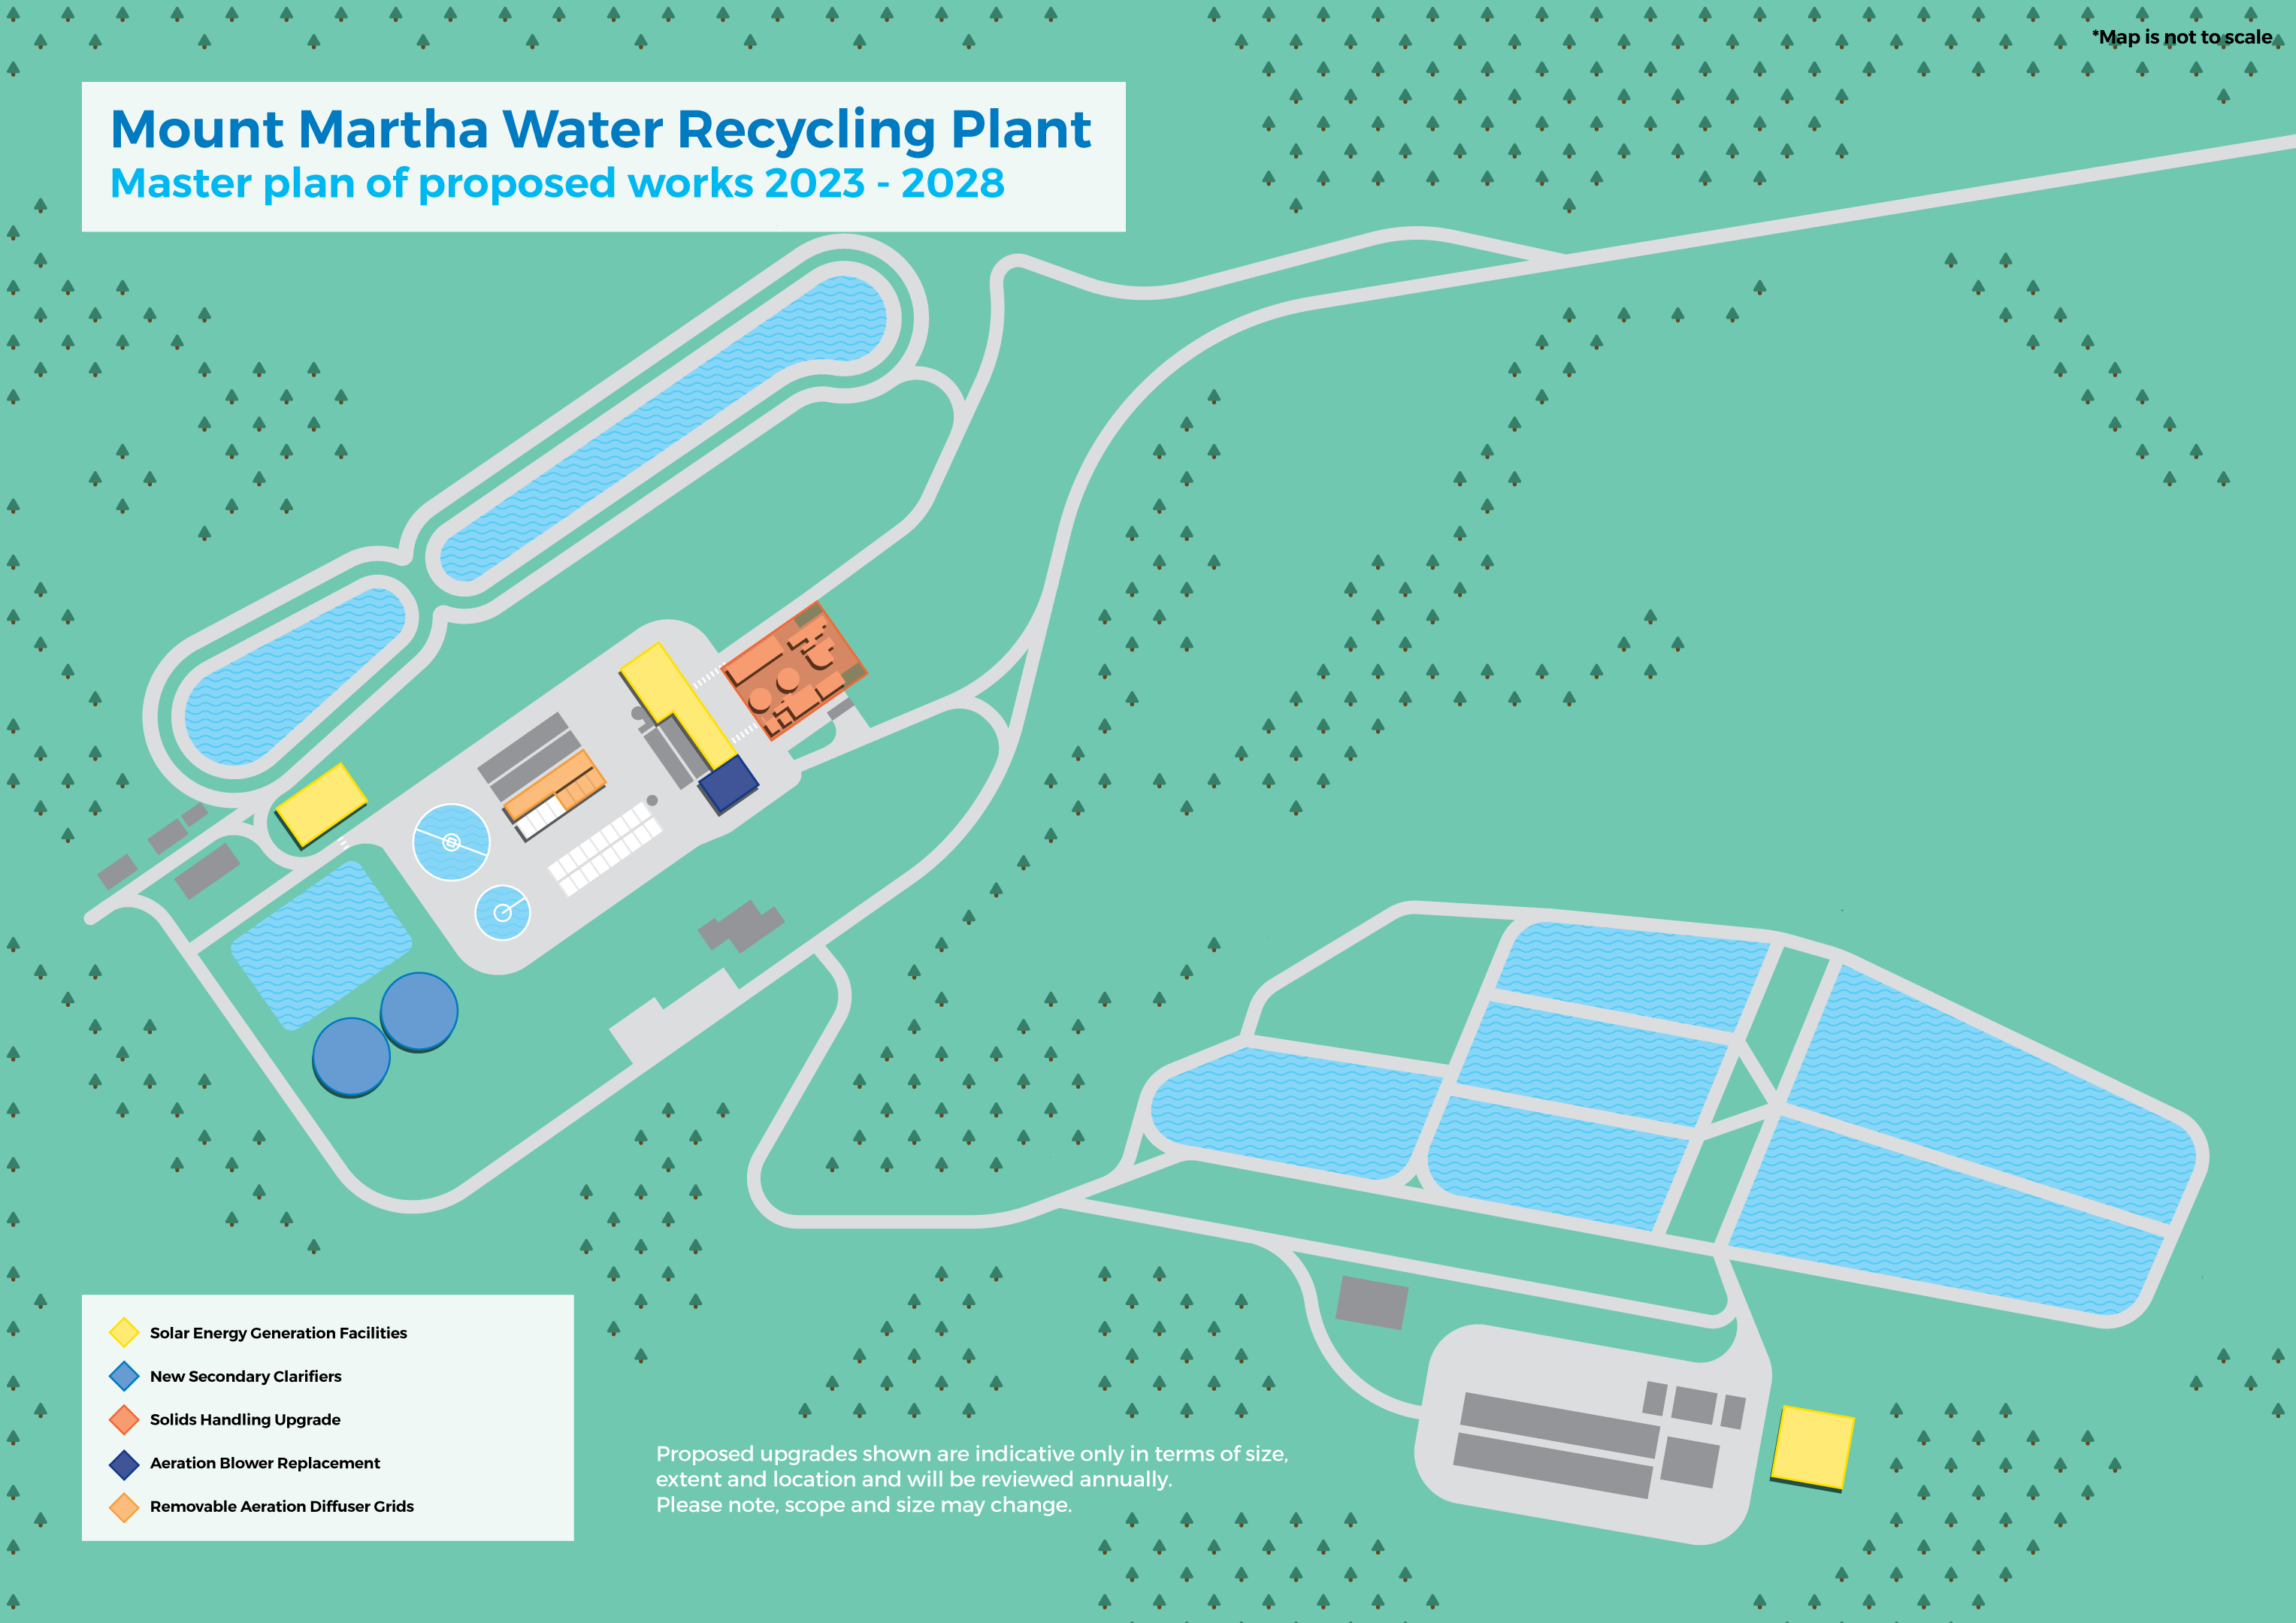 Mount Martha Water Recycling Plant